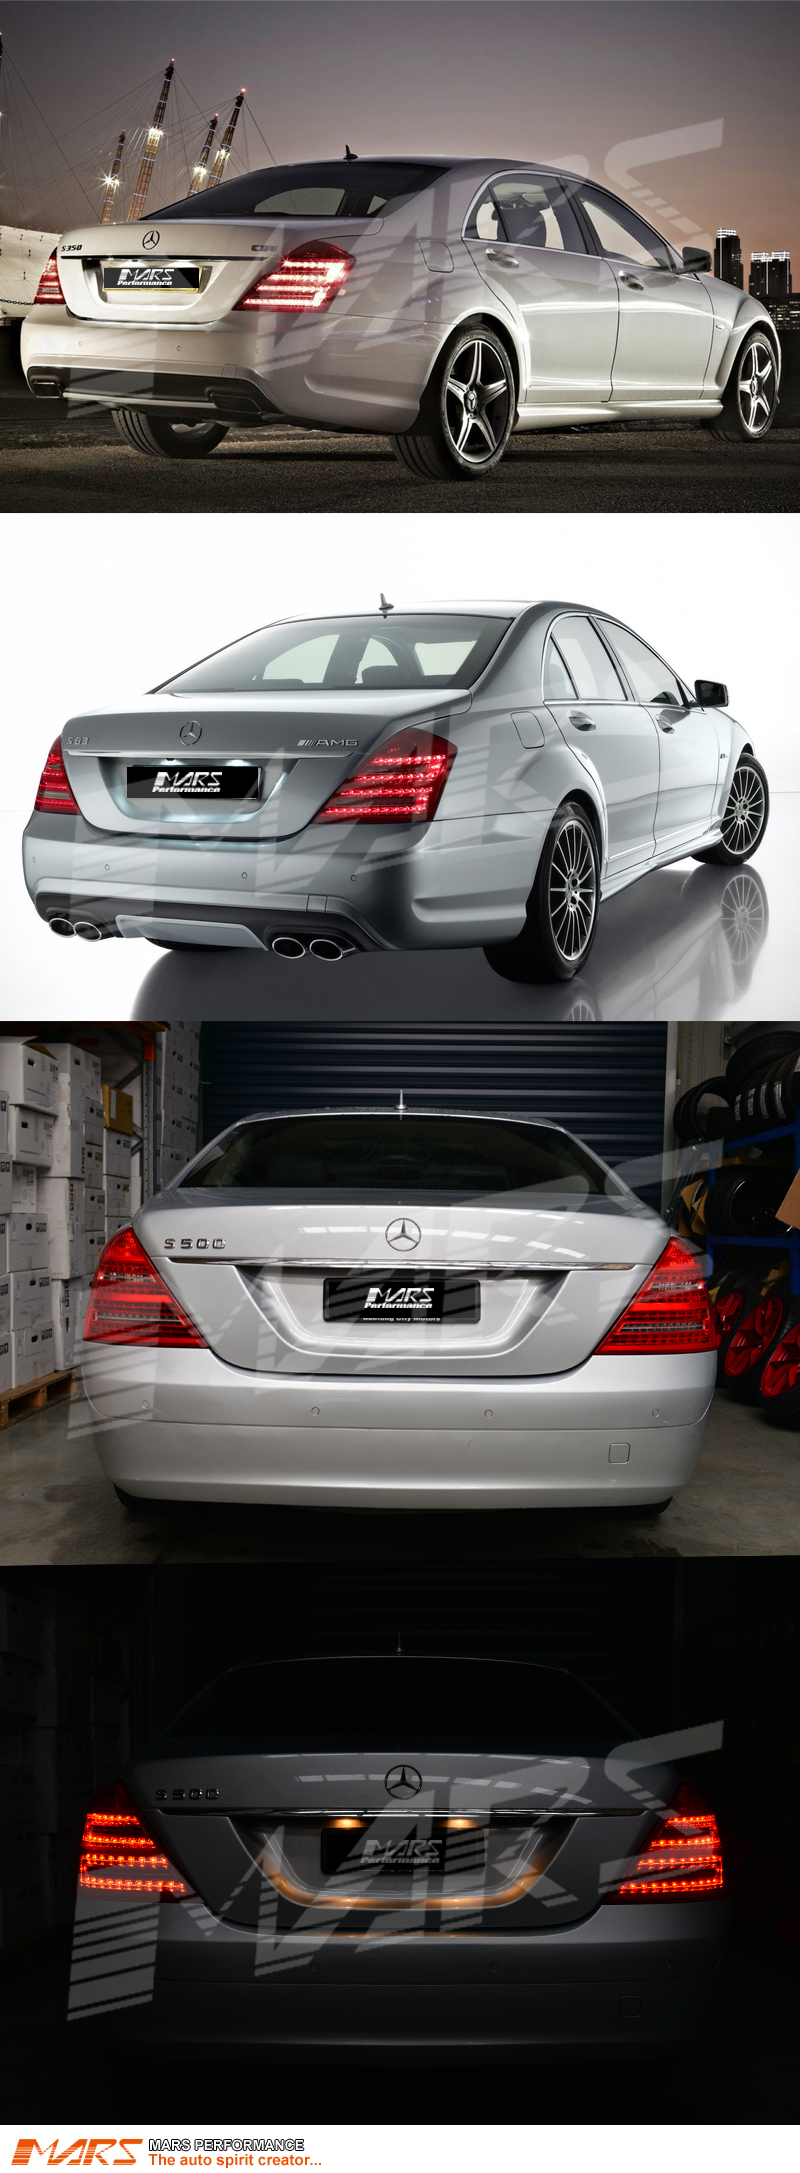 Clear Red LED Tail Lights for Mercedes-Benz S-Class W221 Sedan Pre update  06-09 | Mars Performance